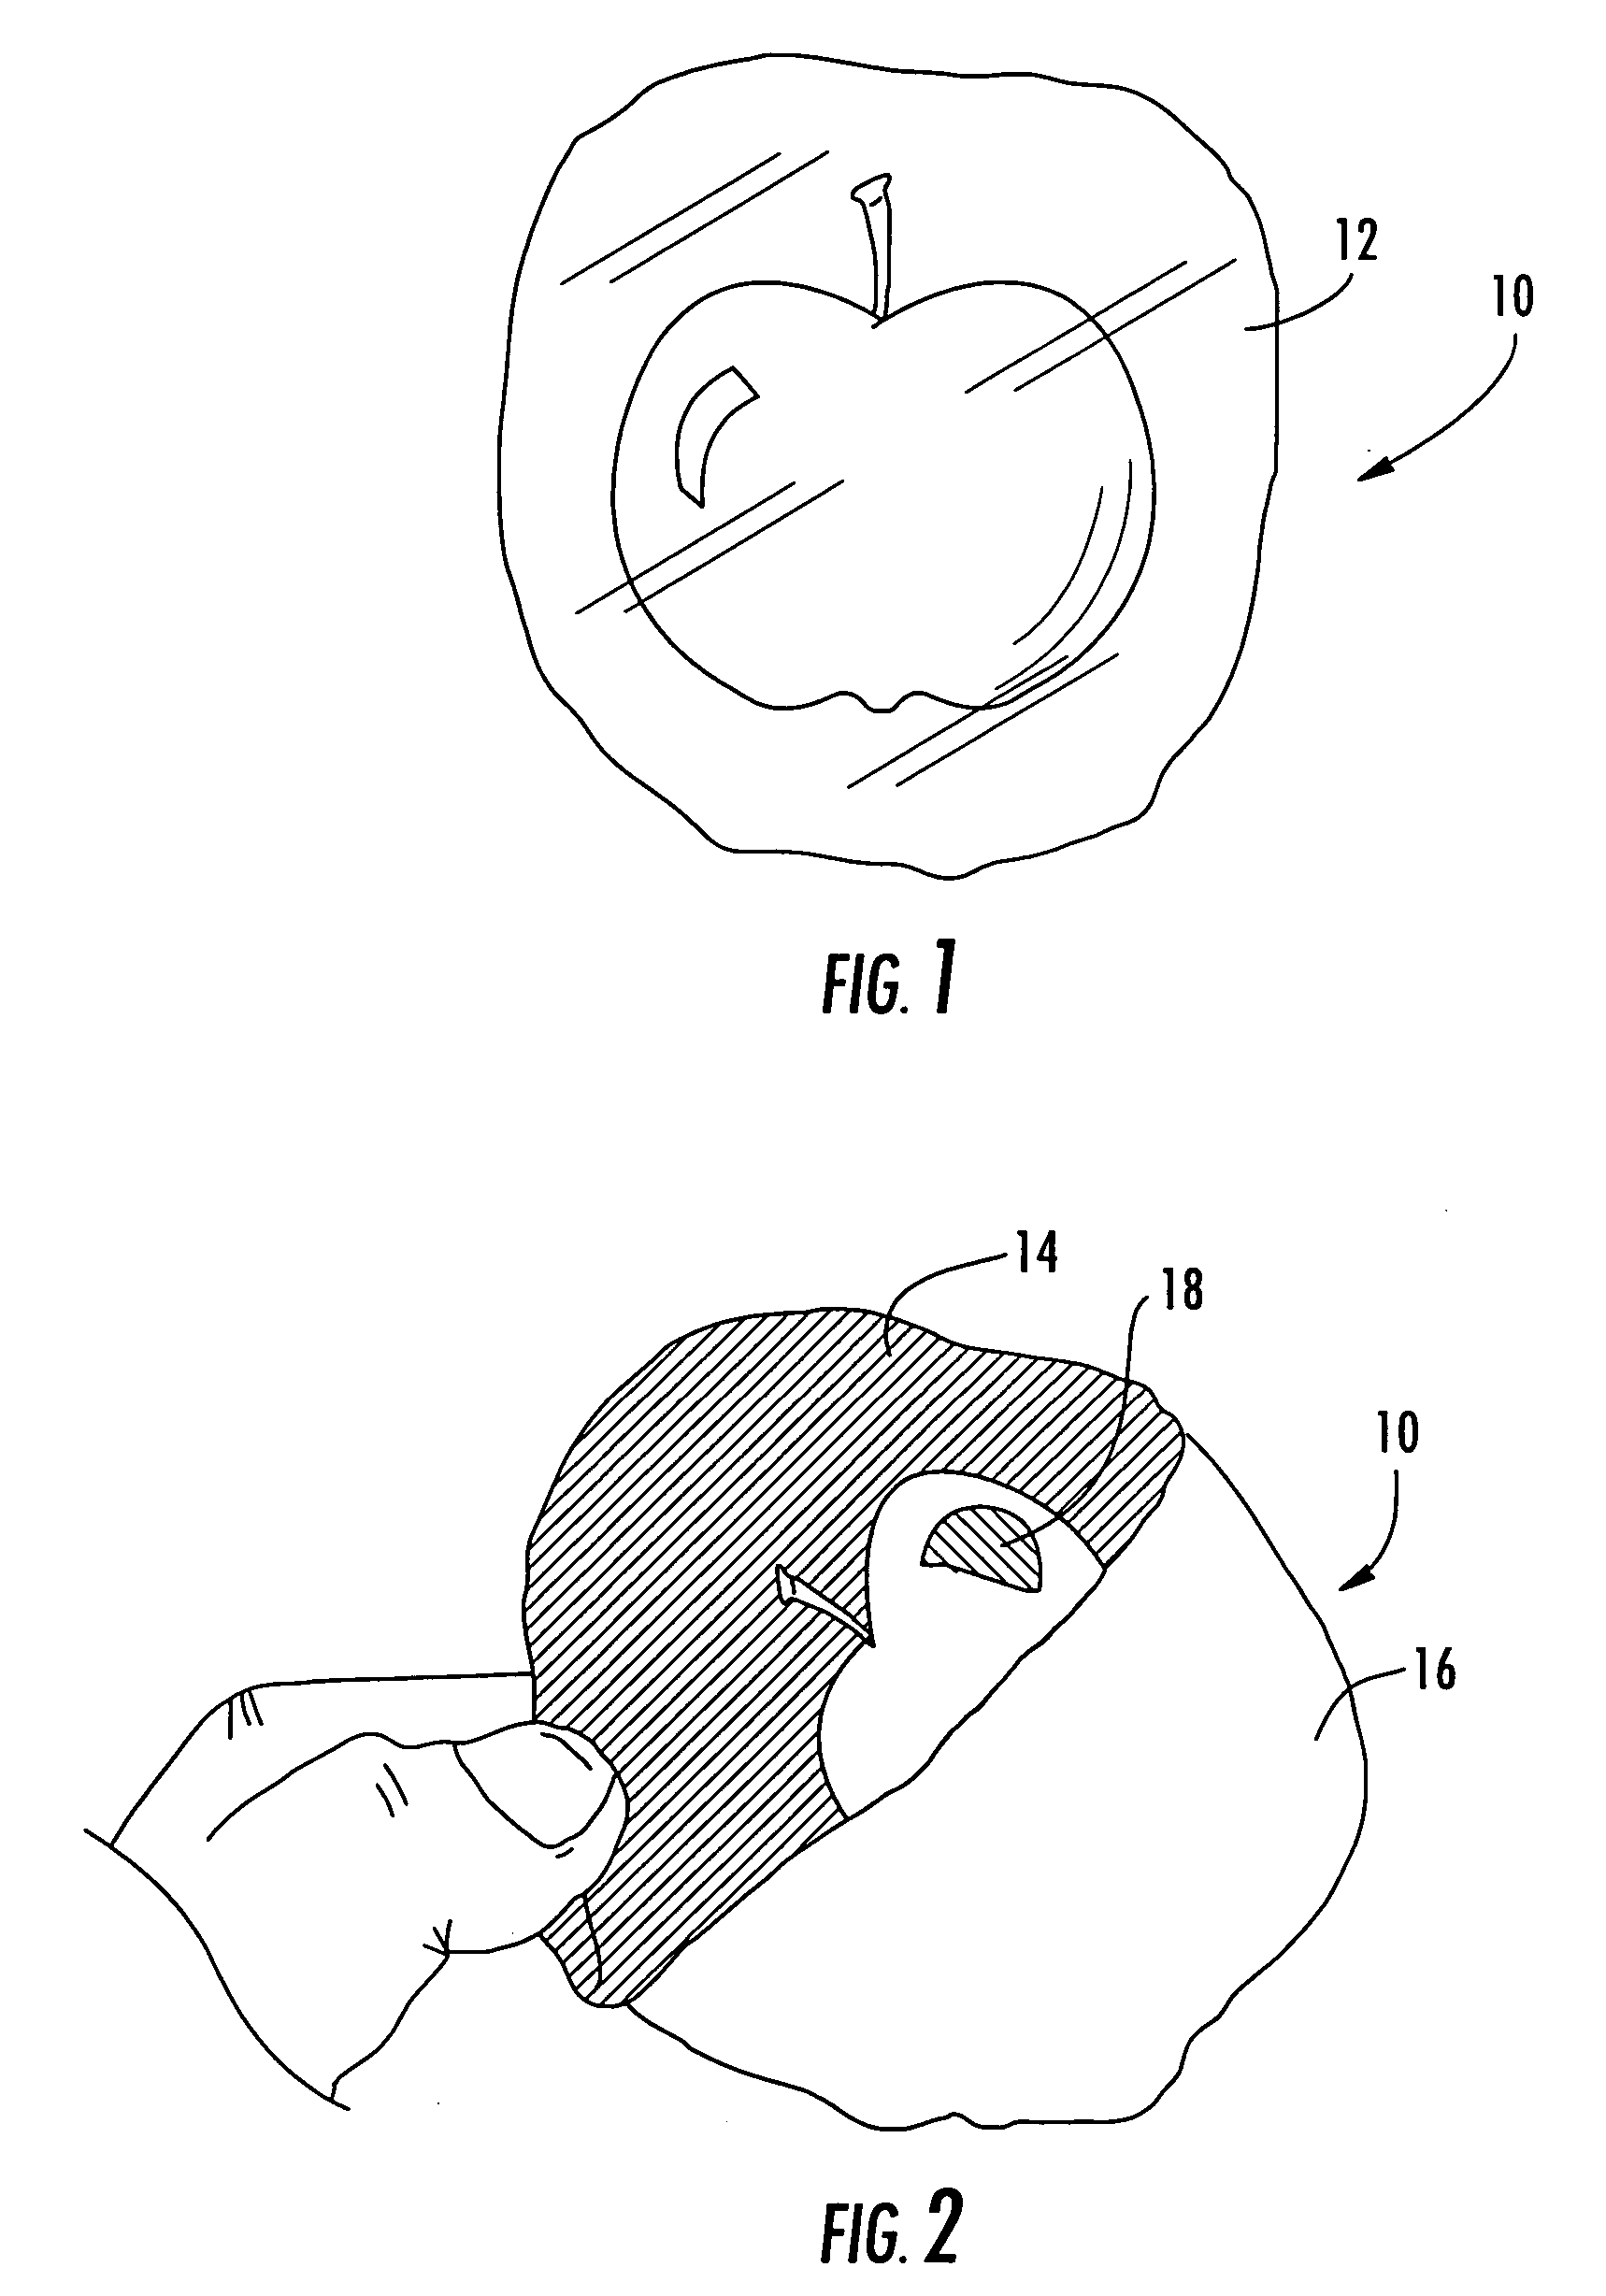 Method for producing a metallic temporary tattoo